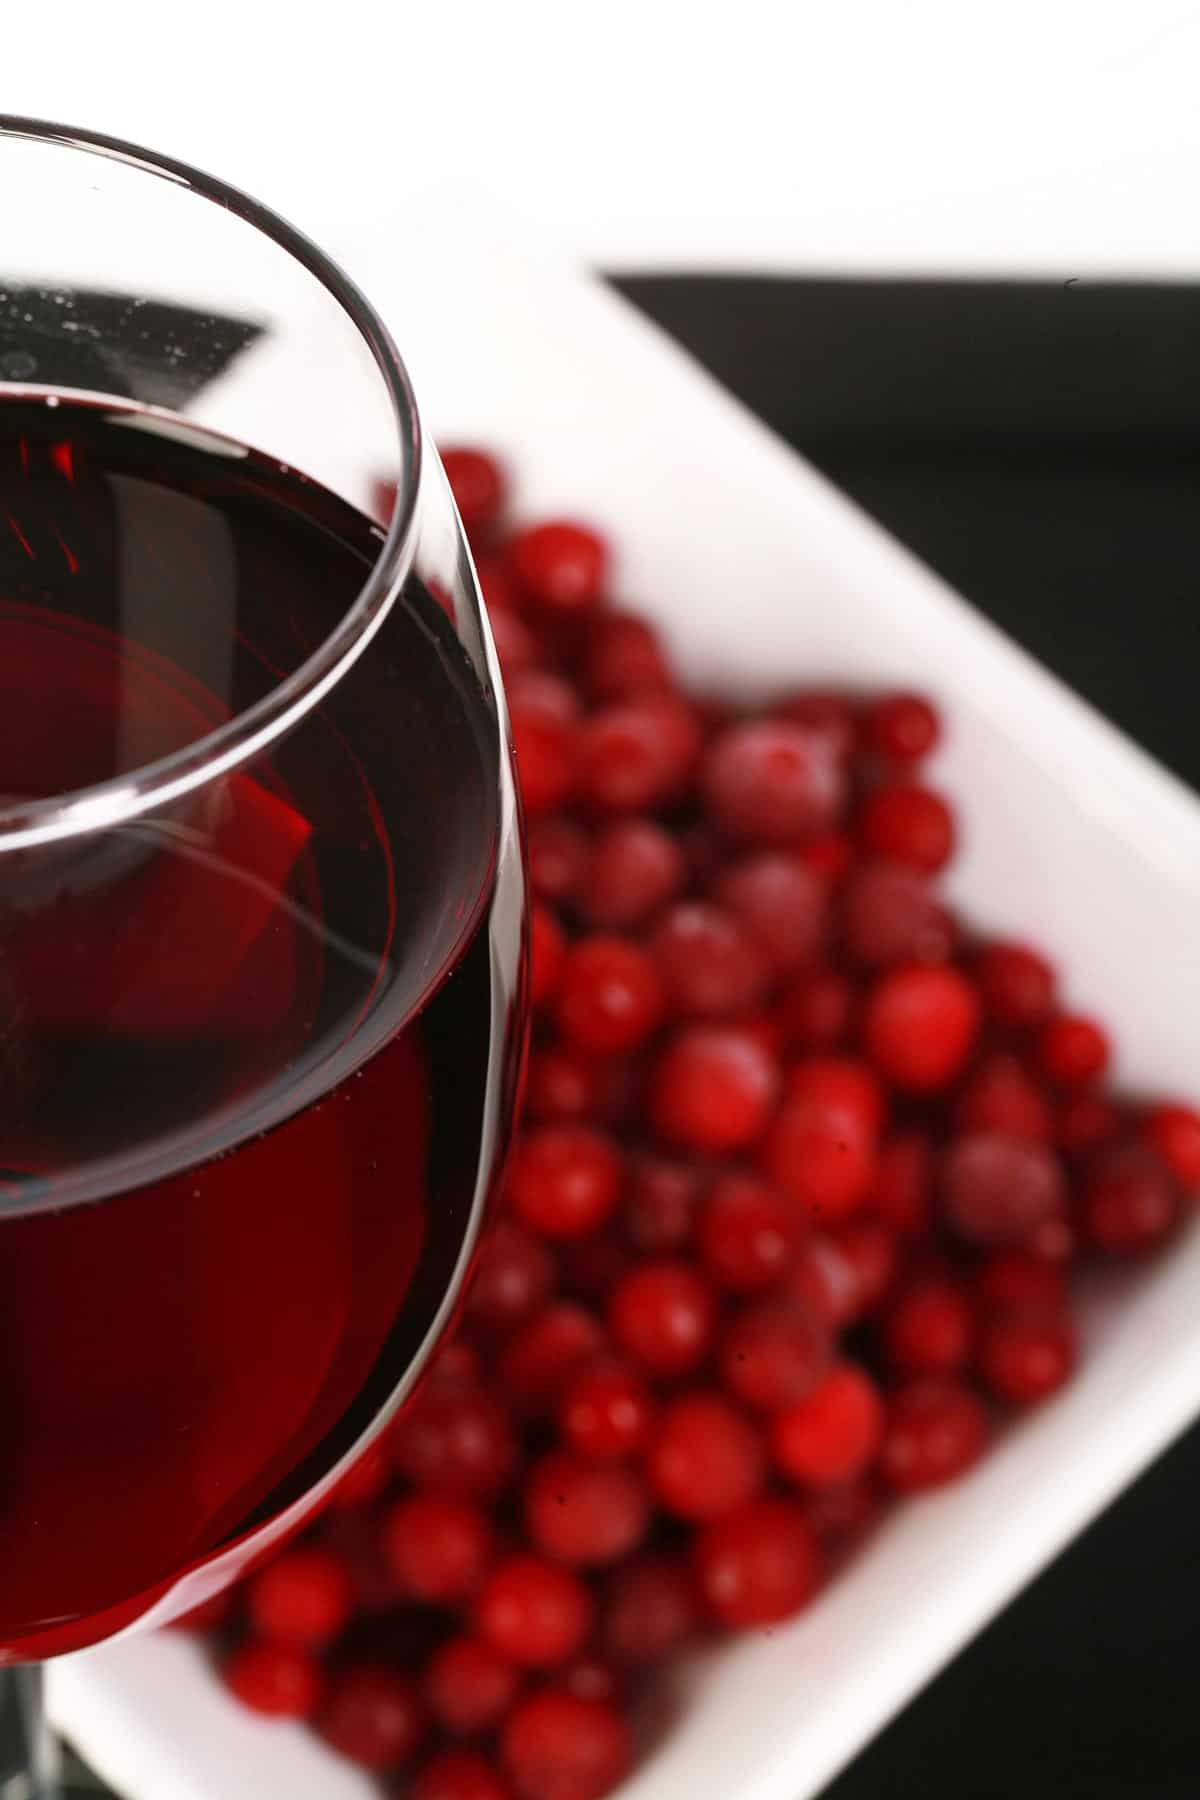 A glass of red wine - made from this lingonberry wine recipe - is pictured next to a small bowl of lingonberries.